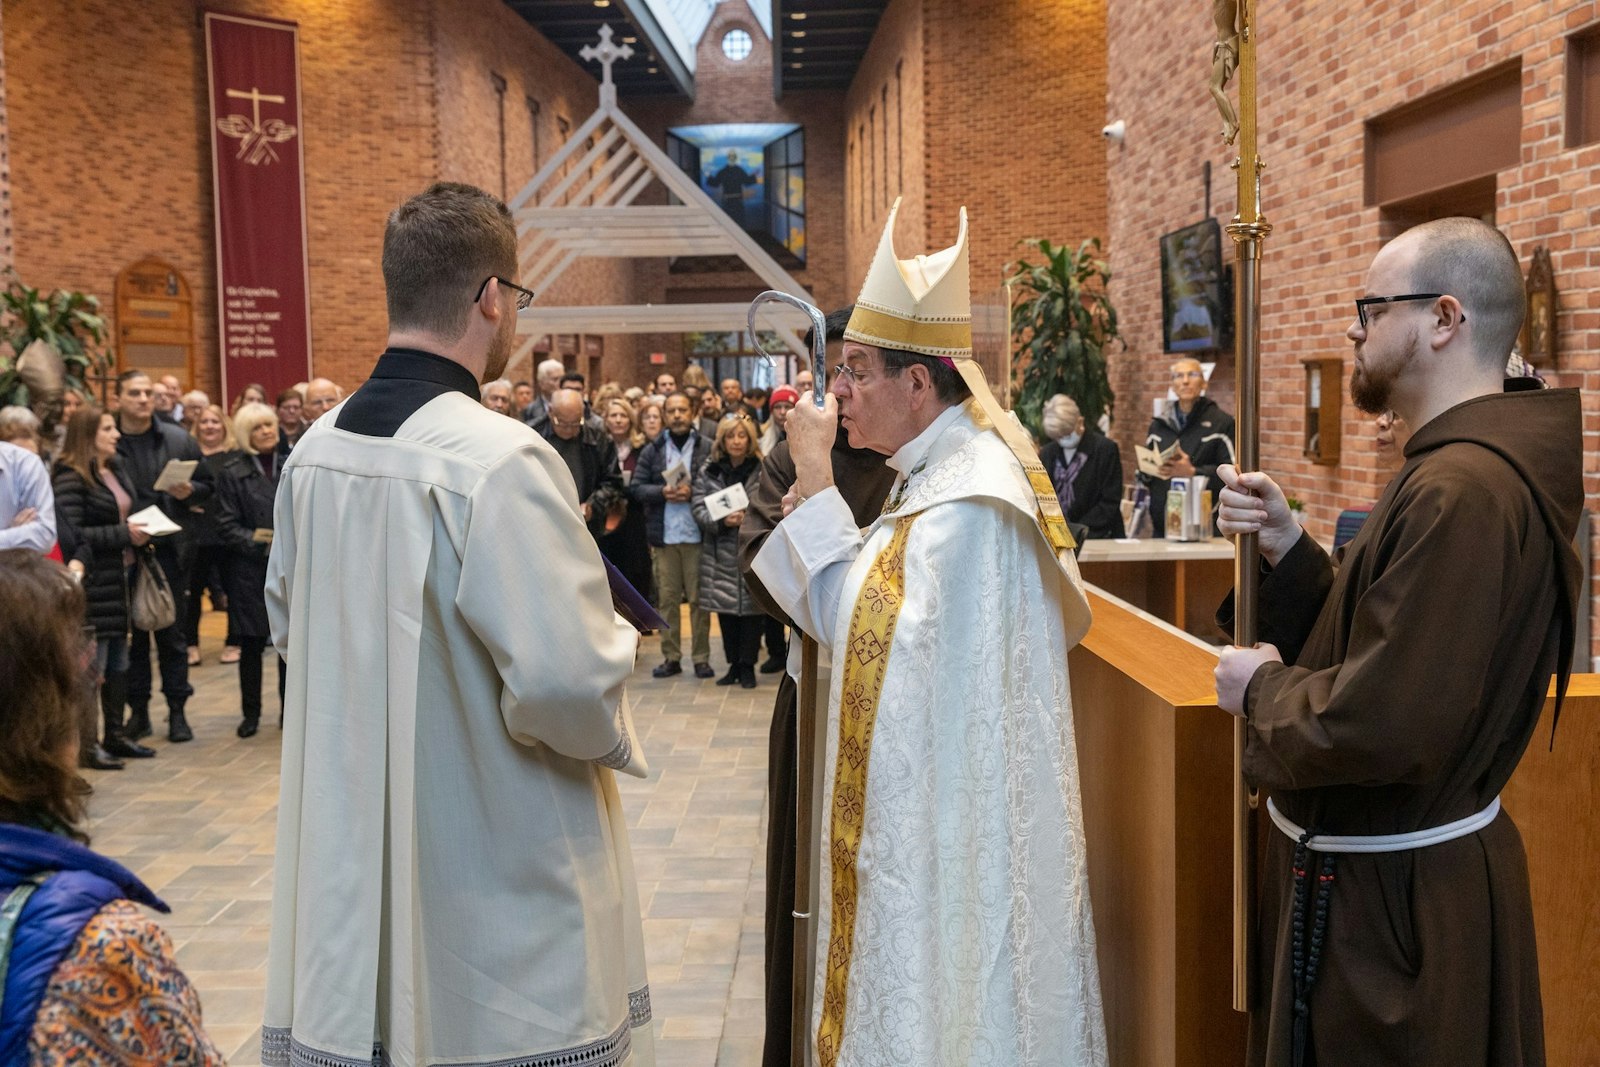 Archbishop Vigneron prays a blessing at the reception desk of the newly renovated Solanus Casey Center in Detroit on Dec. 3. The archbishop joined the Capuchin Franciscan Province of St. Joseph in dedicating a new 5,000-square-foot expansion, in addition to renovations to the center's existing facilities.